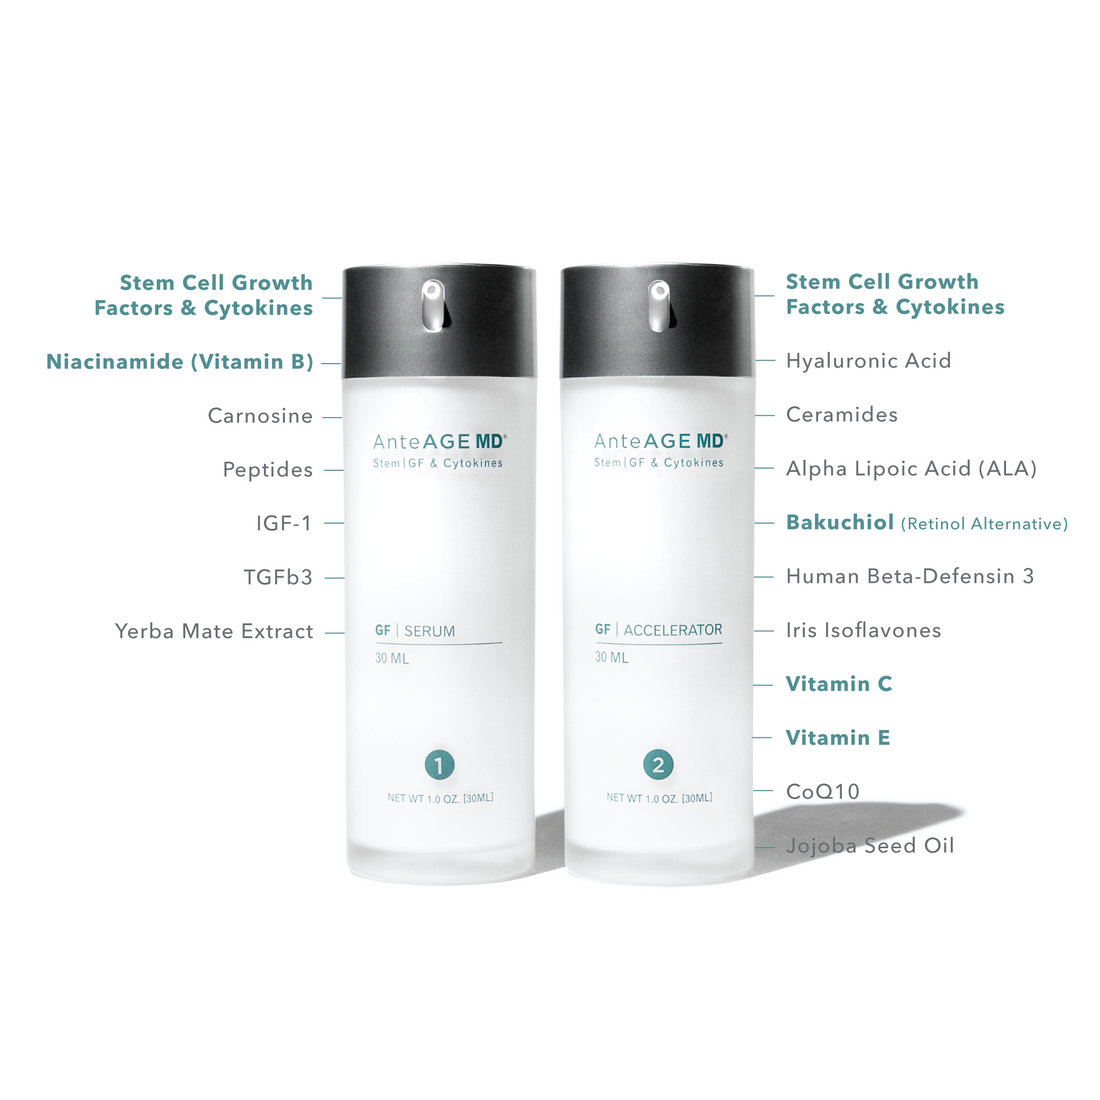 the anteage md system is packed with growth factors, peptides, ceramides and 18 other powerful anti-aging ingredients.